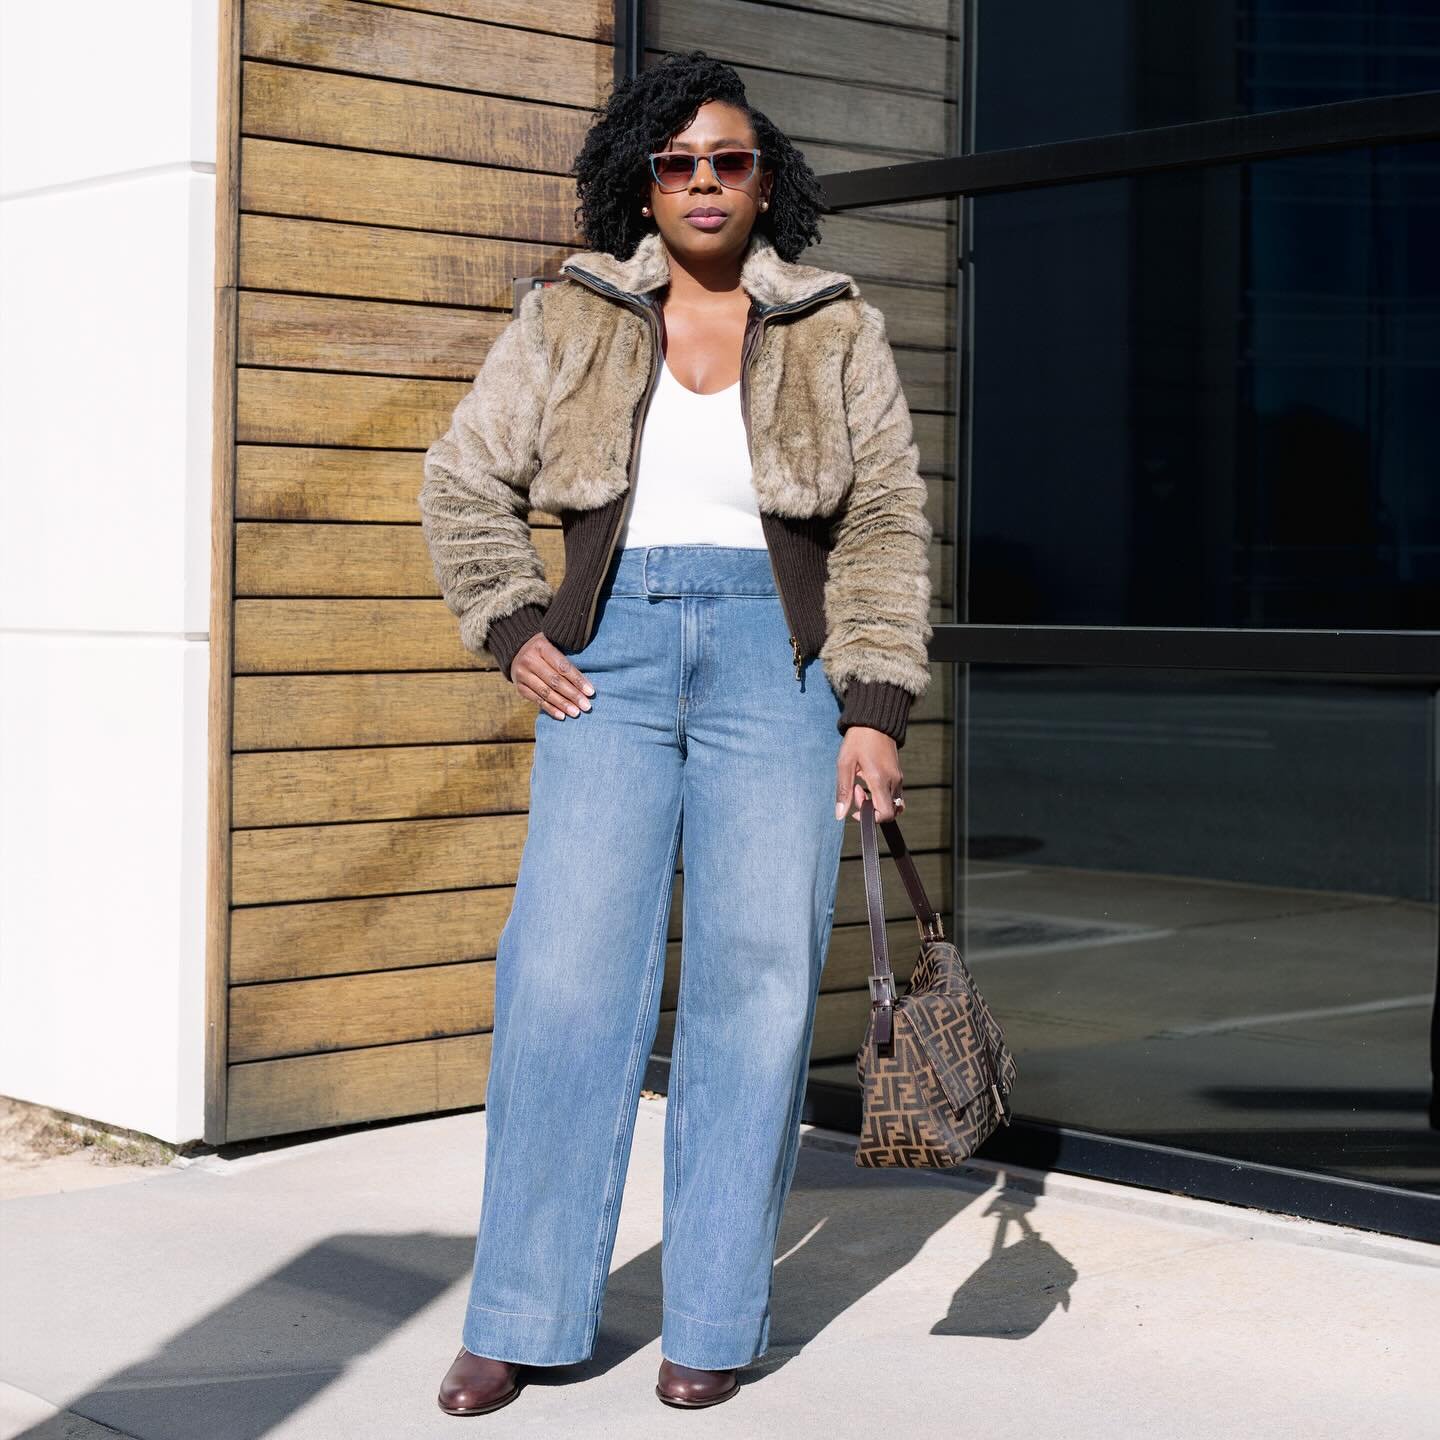 Although I&rsquo;m looking forward to welcoming Spring tomorrow, I&rsquo;m going to miss wearing my favorite winter outerwear. What winter items will you miss the most?

www.meetmarquita.com

Faux fur coat (old)- @express 
Shirt- @express 
Jeans- @ex